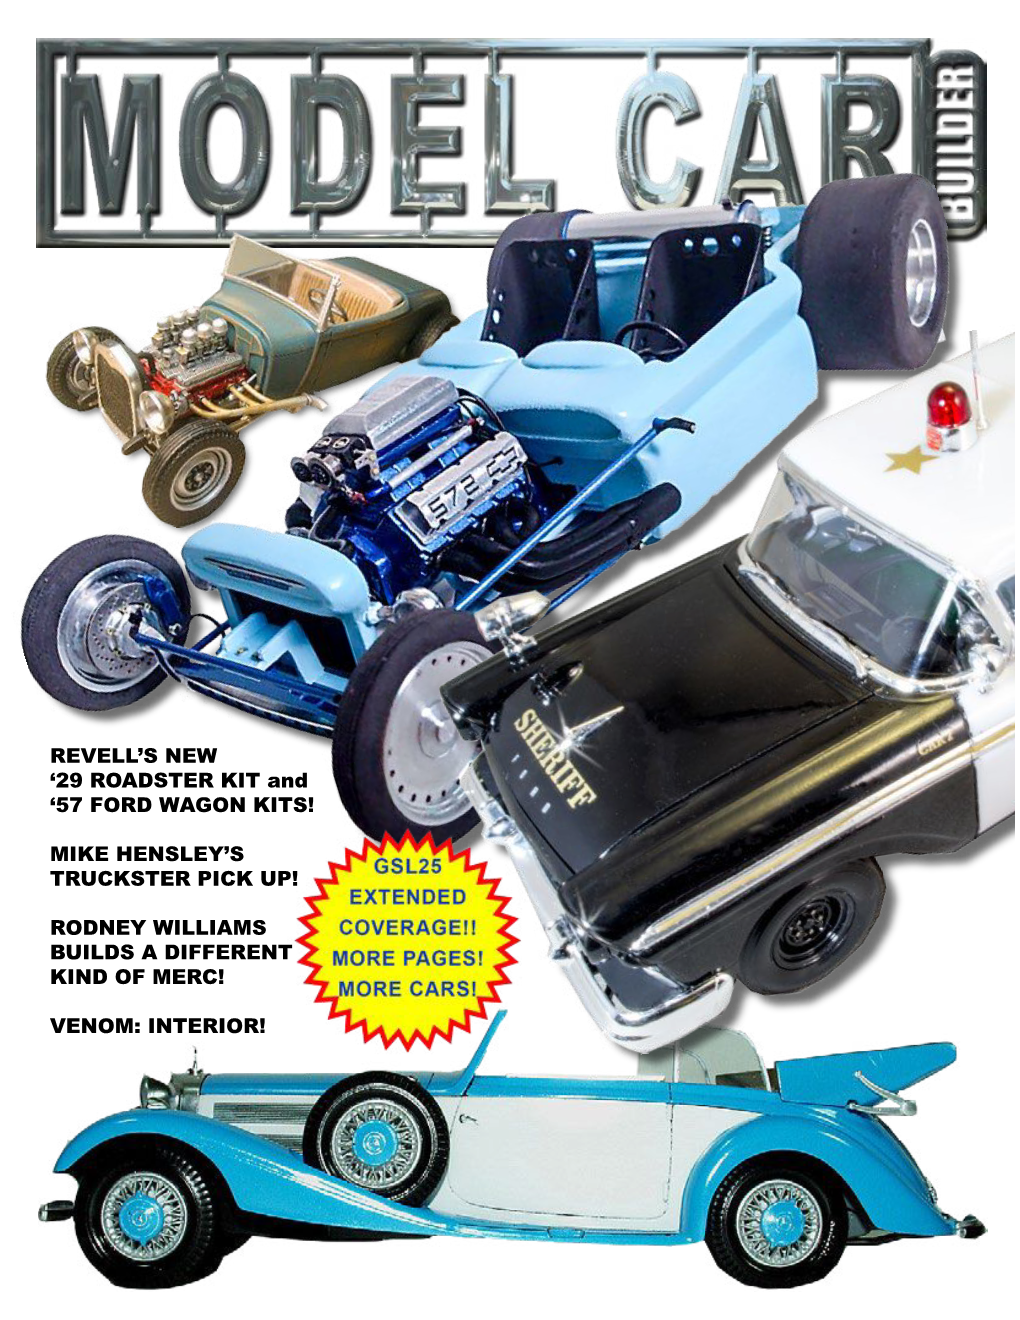 REVELL's NEW '29 ROADSTER KIT and '57 FORD WAGON KITS! MIKE